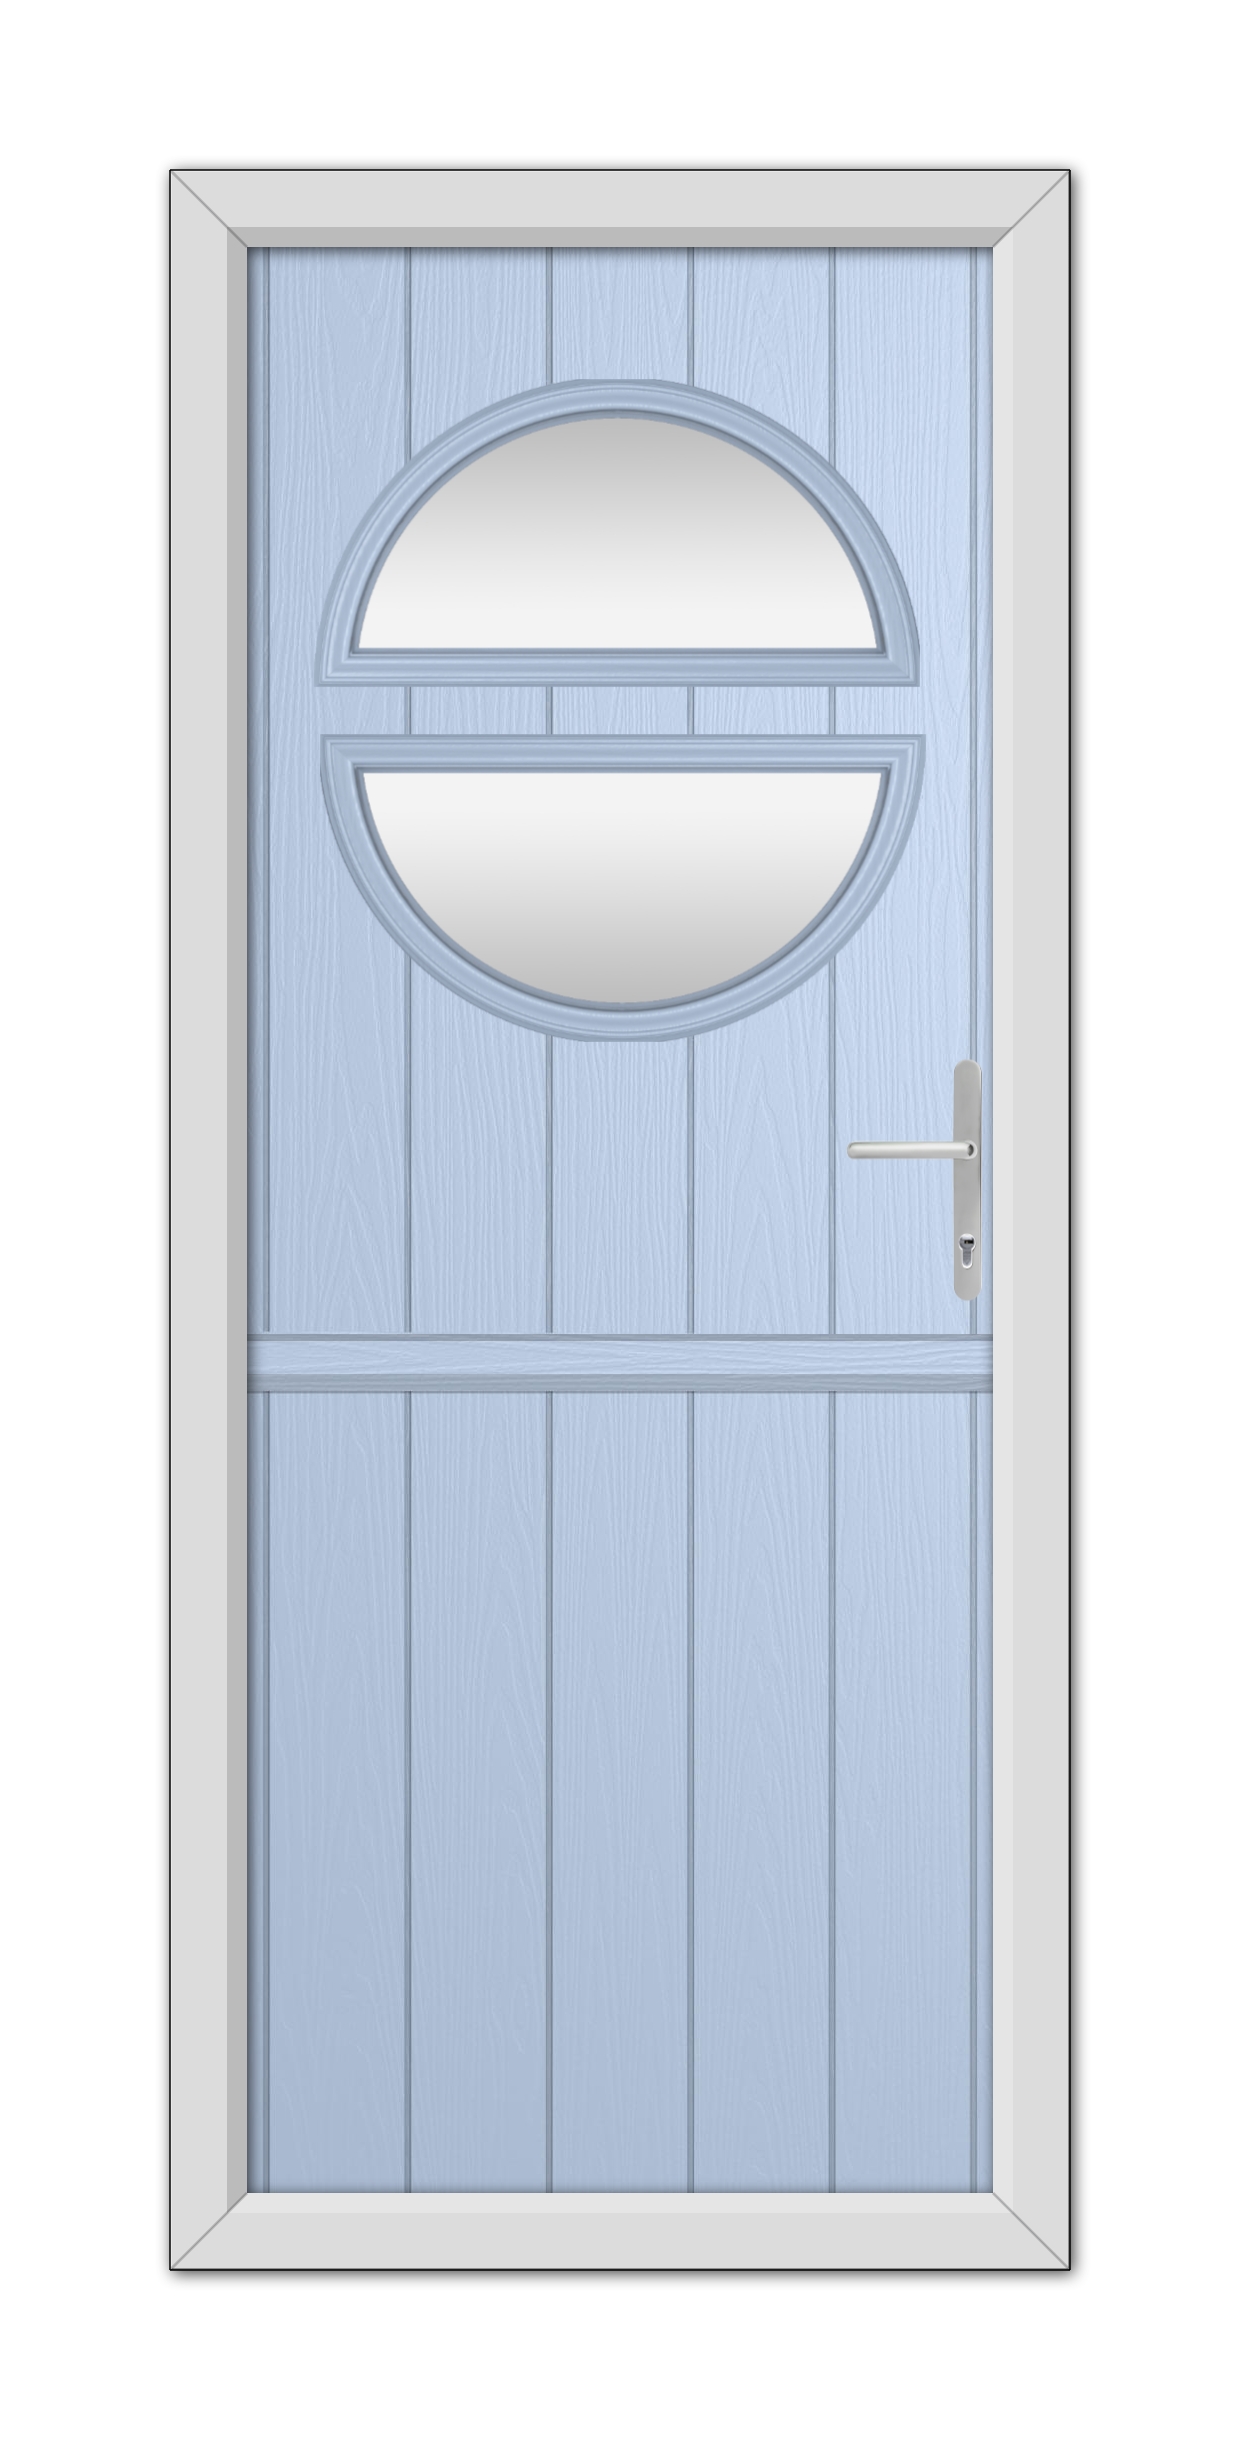 A Duck Egg Blue Kent Stable Composite Door featuring two horizontal oval glass panels and a modern handle, set within a white frame.